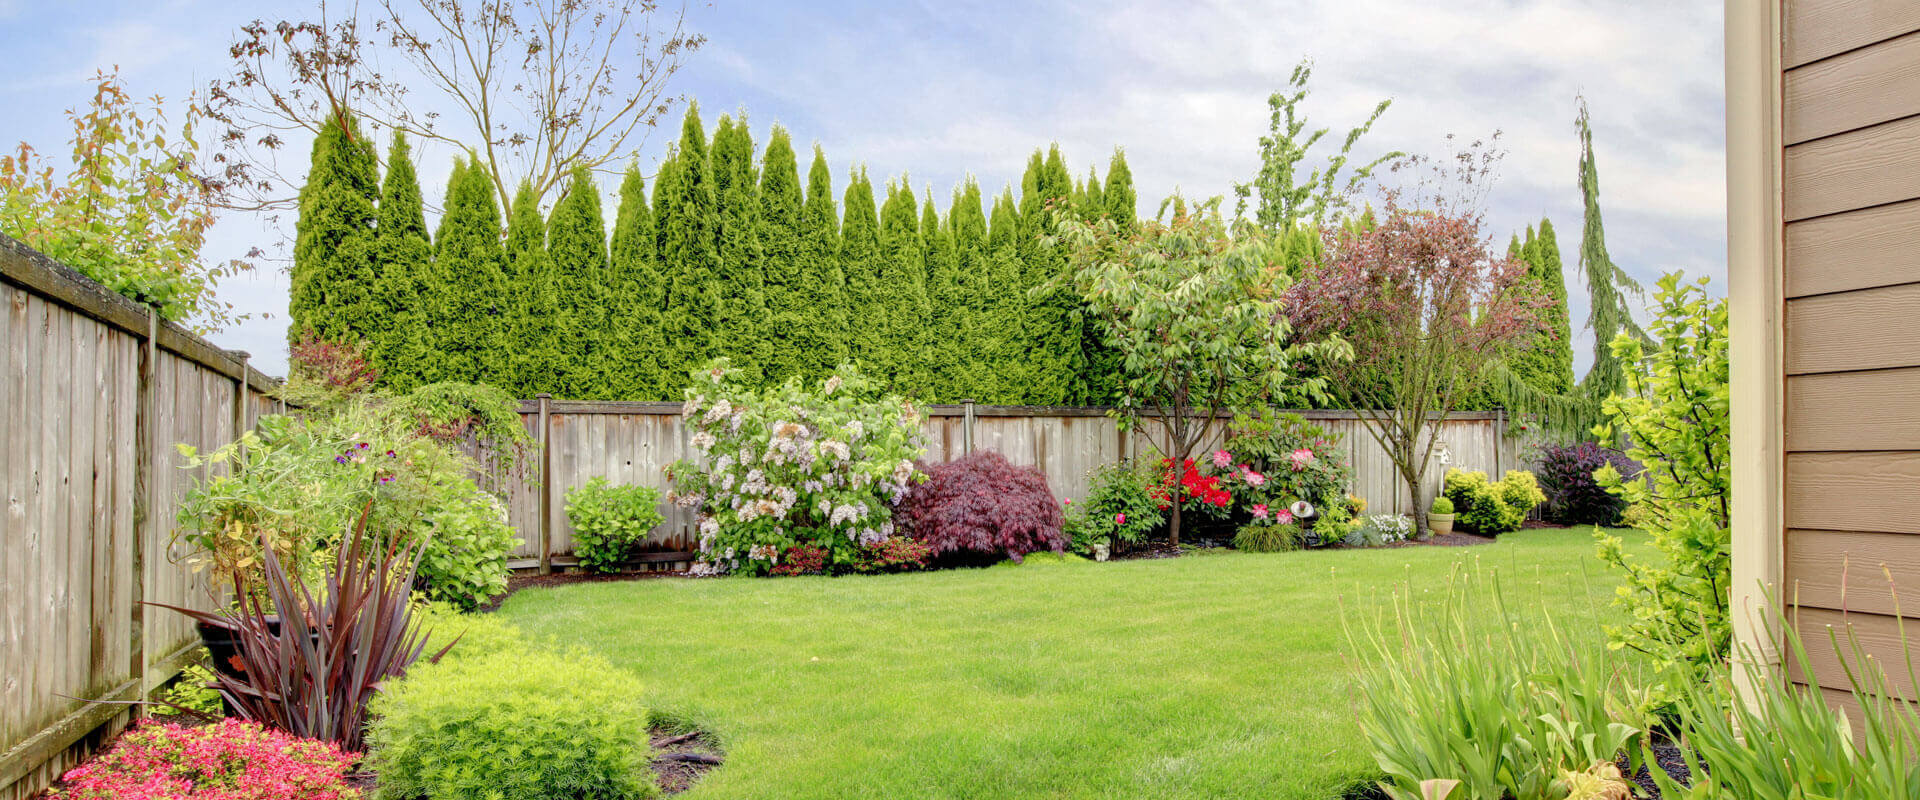 Edmonton Landscaping Services, Lawn Care Services and Landscaping Company